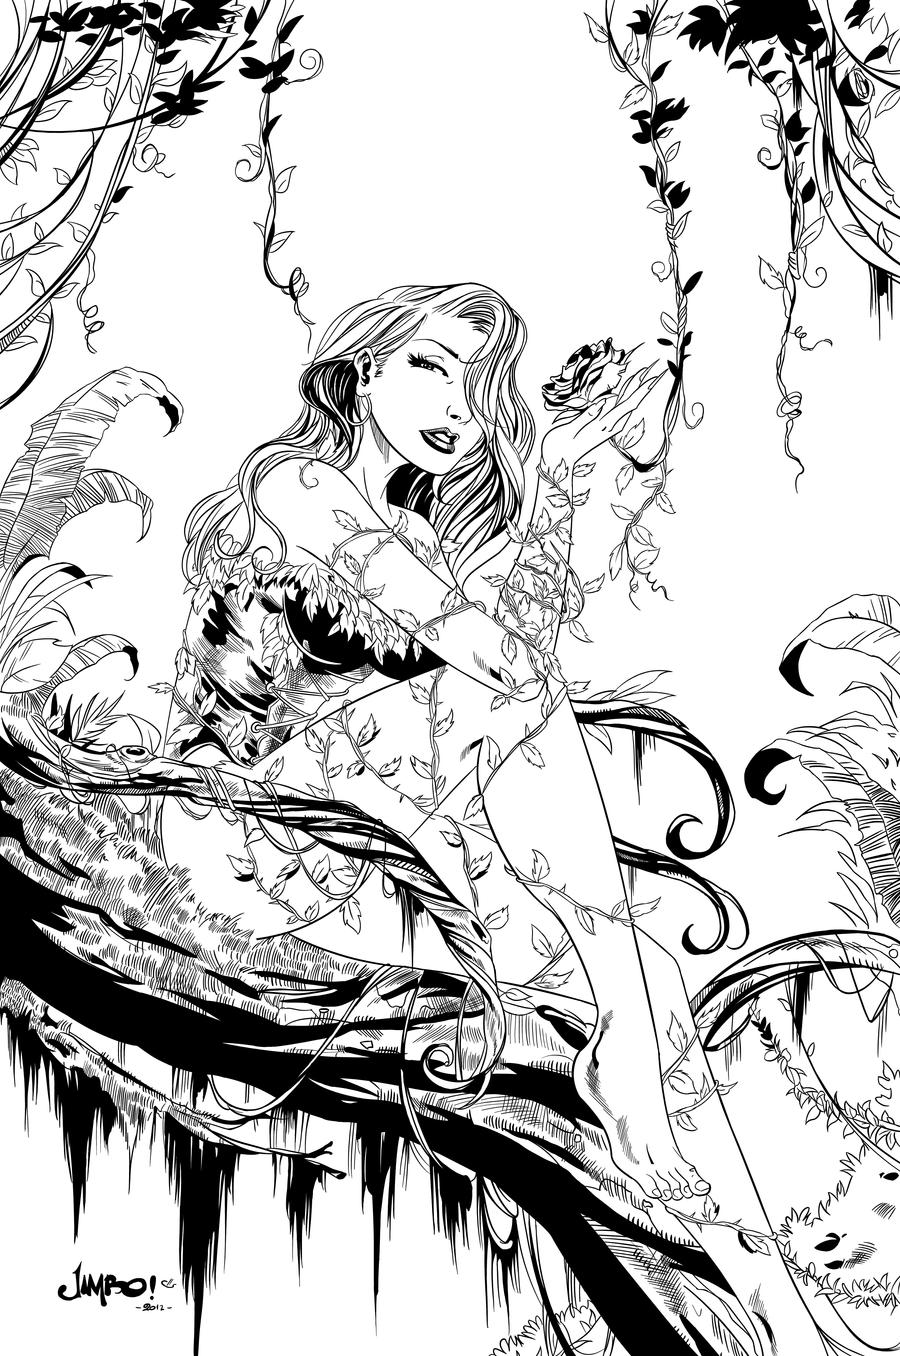 Poison ivy inked by sereglaure on